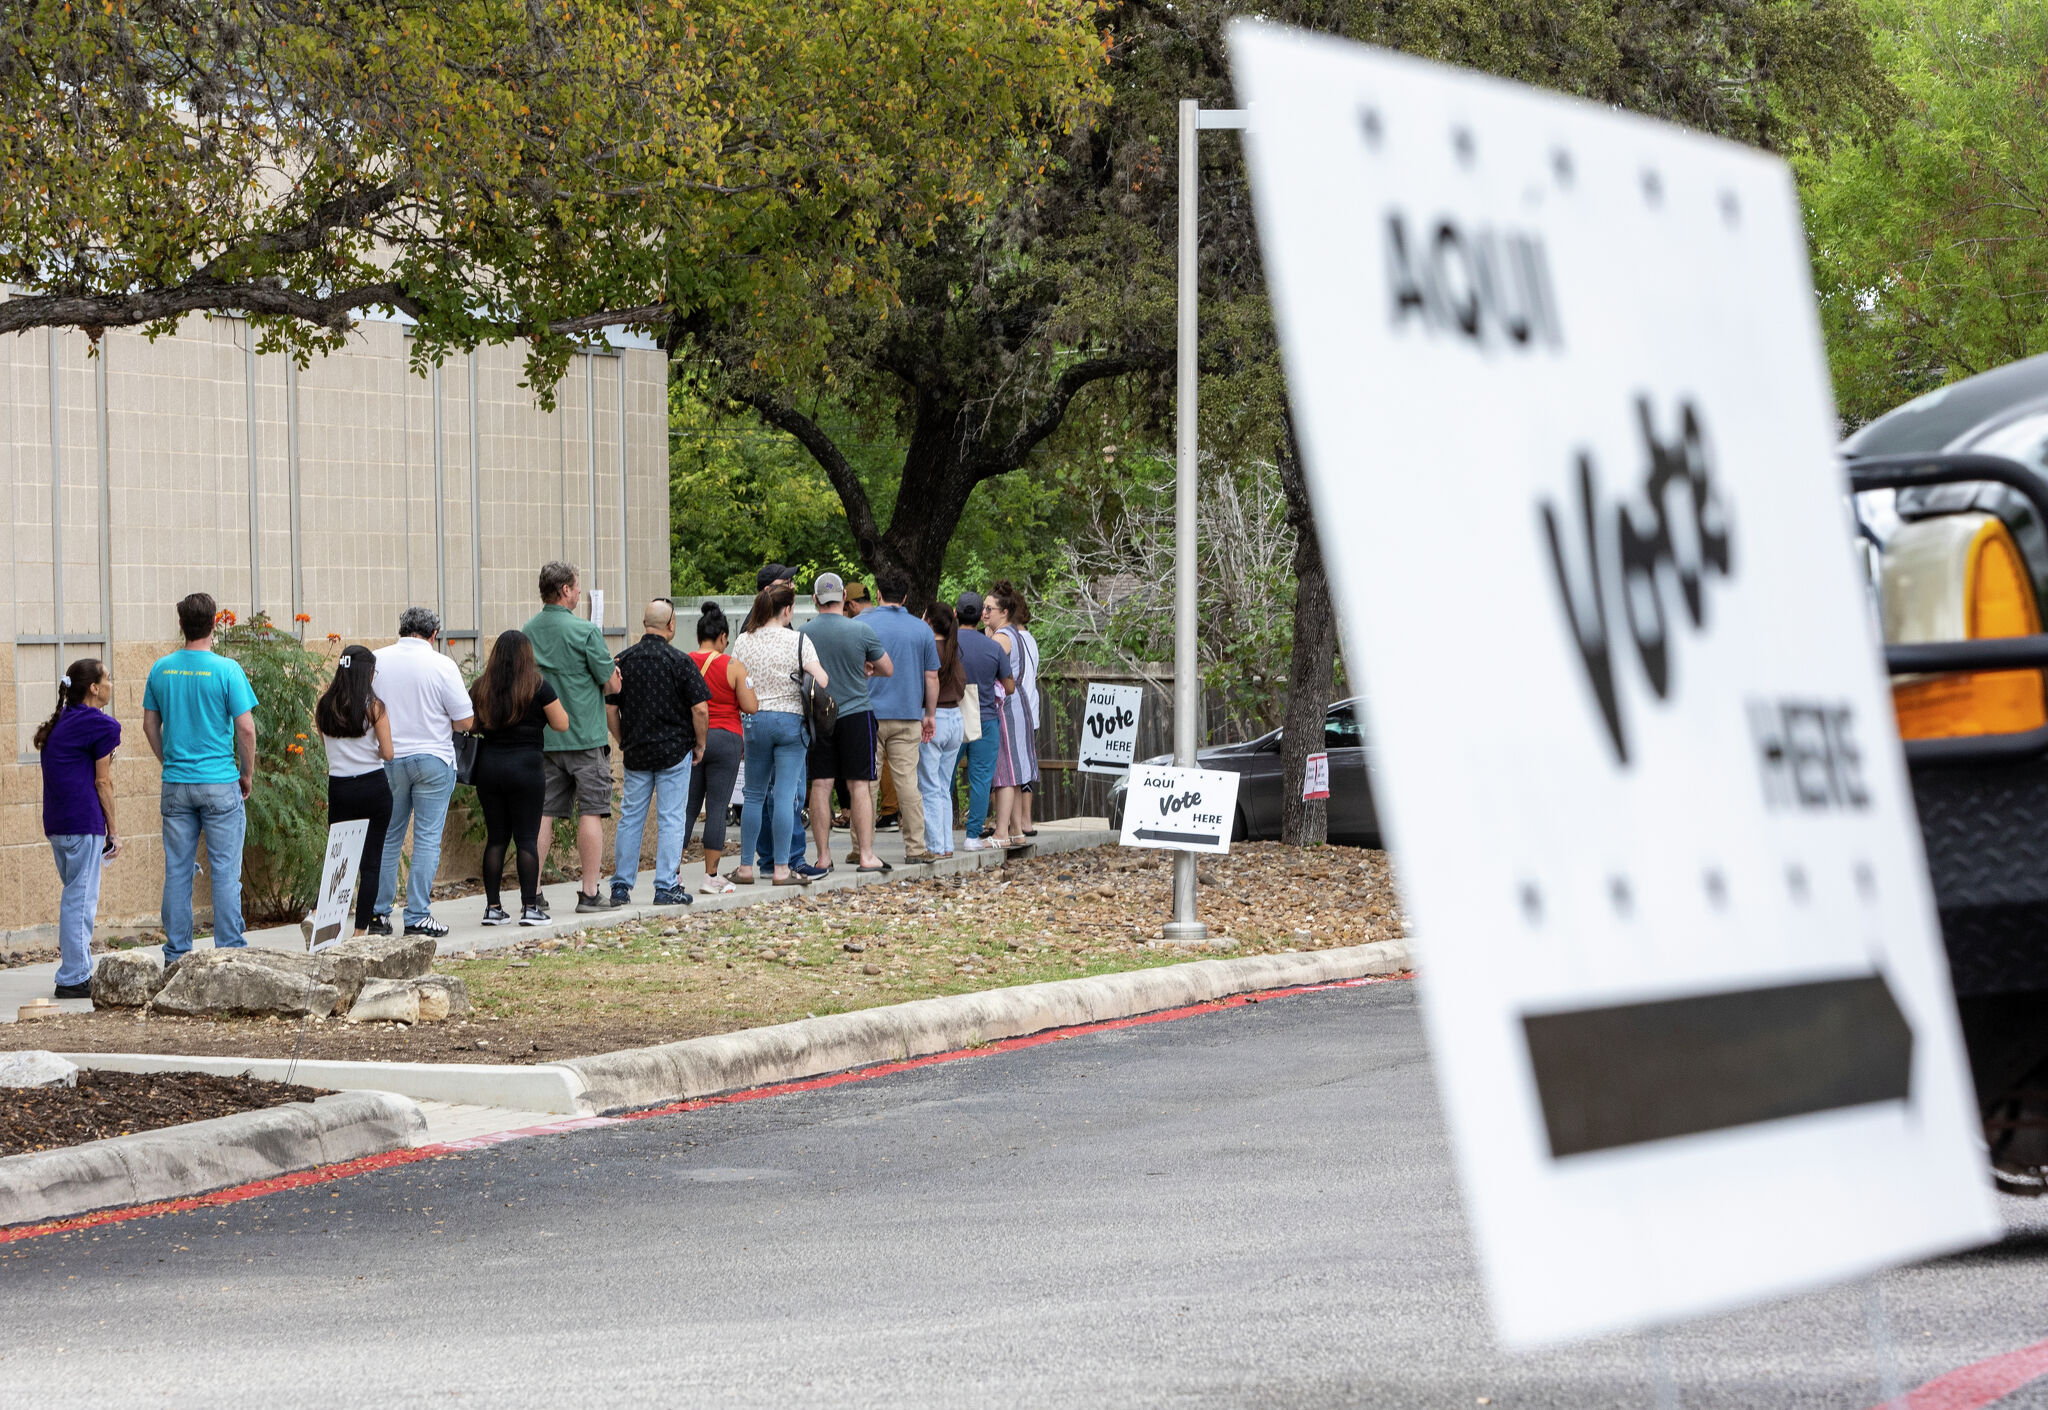 What to know about early voting in San Antonio's May election